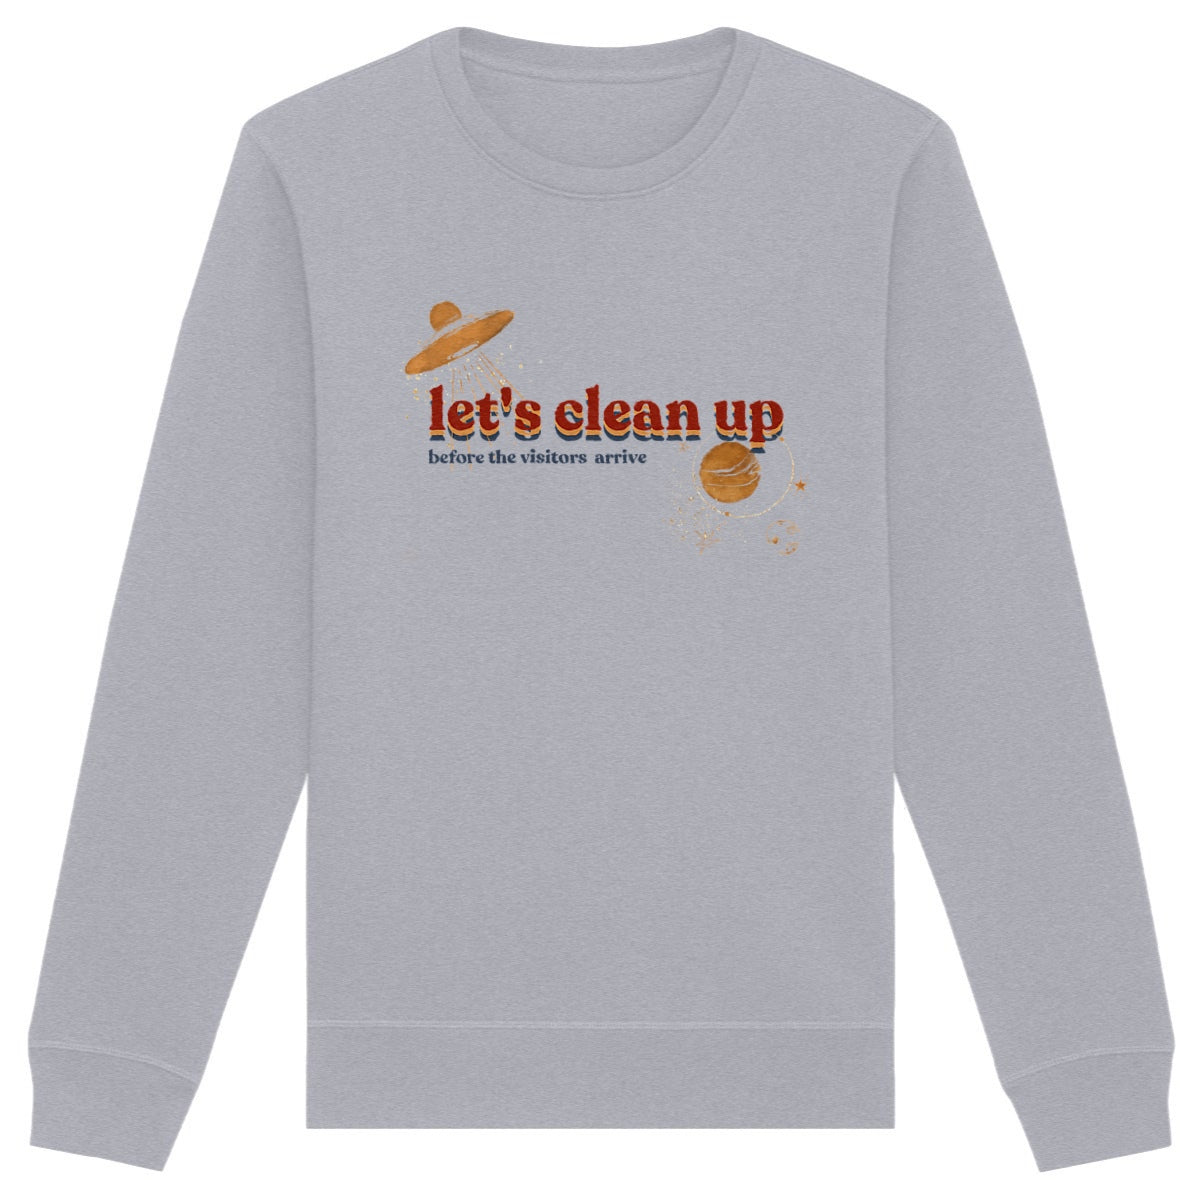 Let's Clean Up Red, Lets clean up, Tees Organic cotton clothes for women, Organic Cotton Clothing for Women, Organic Cotton Tank Tops, Cotton Organic T Shirts, Organic Cotton T Shirt, Band Tees, Vintage Tees, Rolling Stones Bomber Jacket, Stoned Girls, She's a rainbow, Environmental Slogan Tshirt, Sustainable Fashion Ideas, Sustainable Fashion Dresses, What is sustainability in fashion, Teen sustainable fashion and ethical brands, Sustainable Fashion Course, made to order clothing, made to order shirts,